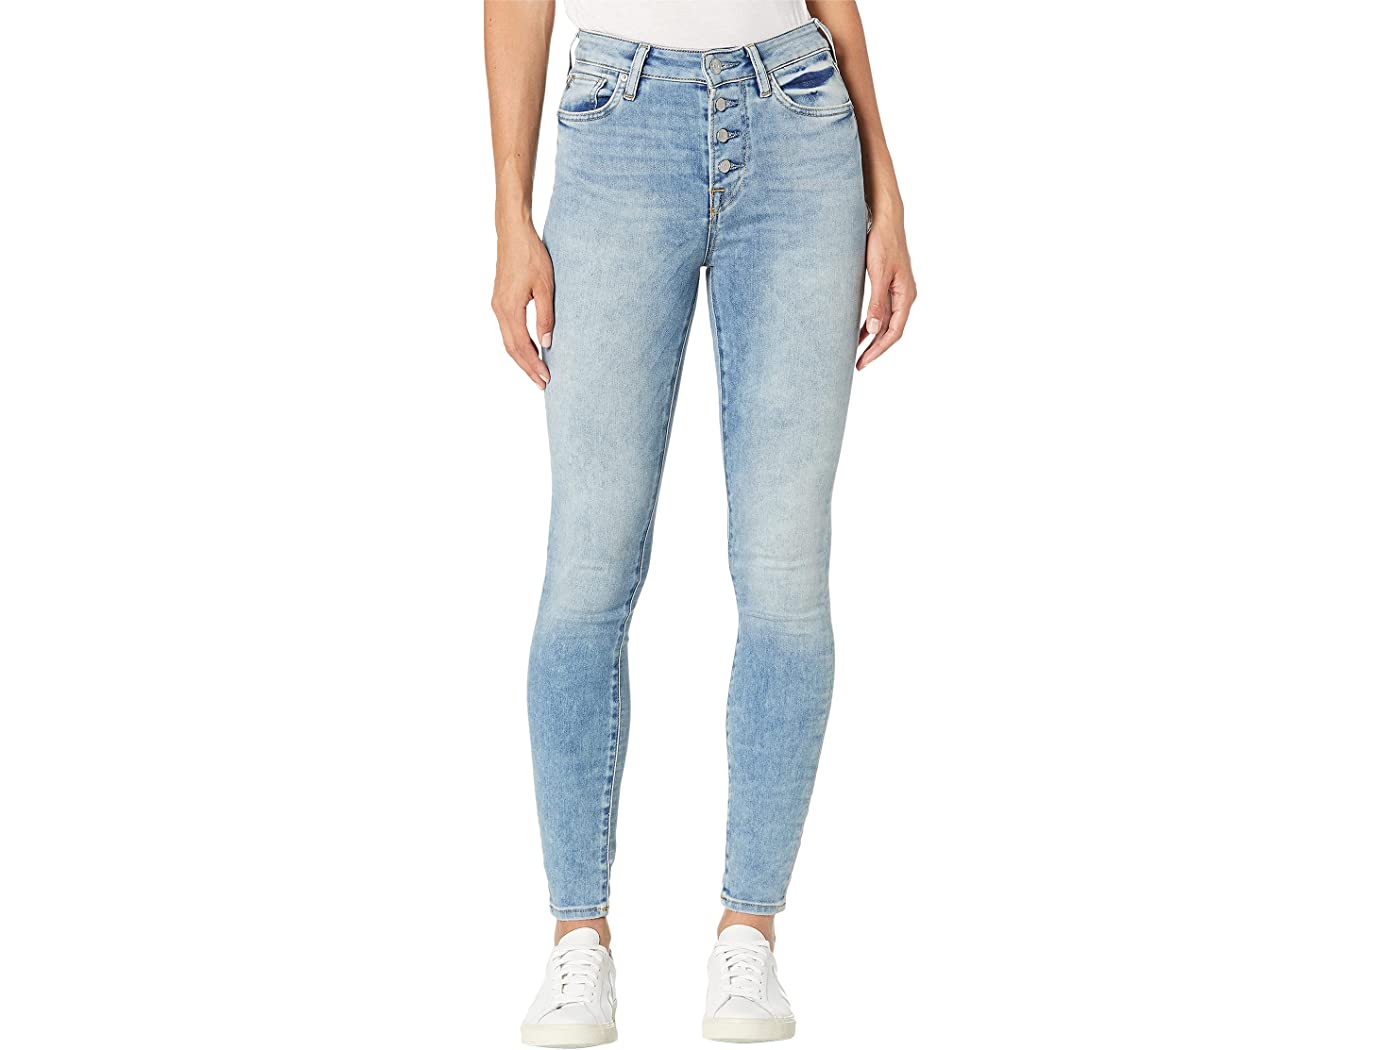 True Religion Skinny Jeans Are on Sale at Zappos — Under $100! | Us Weekly